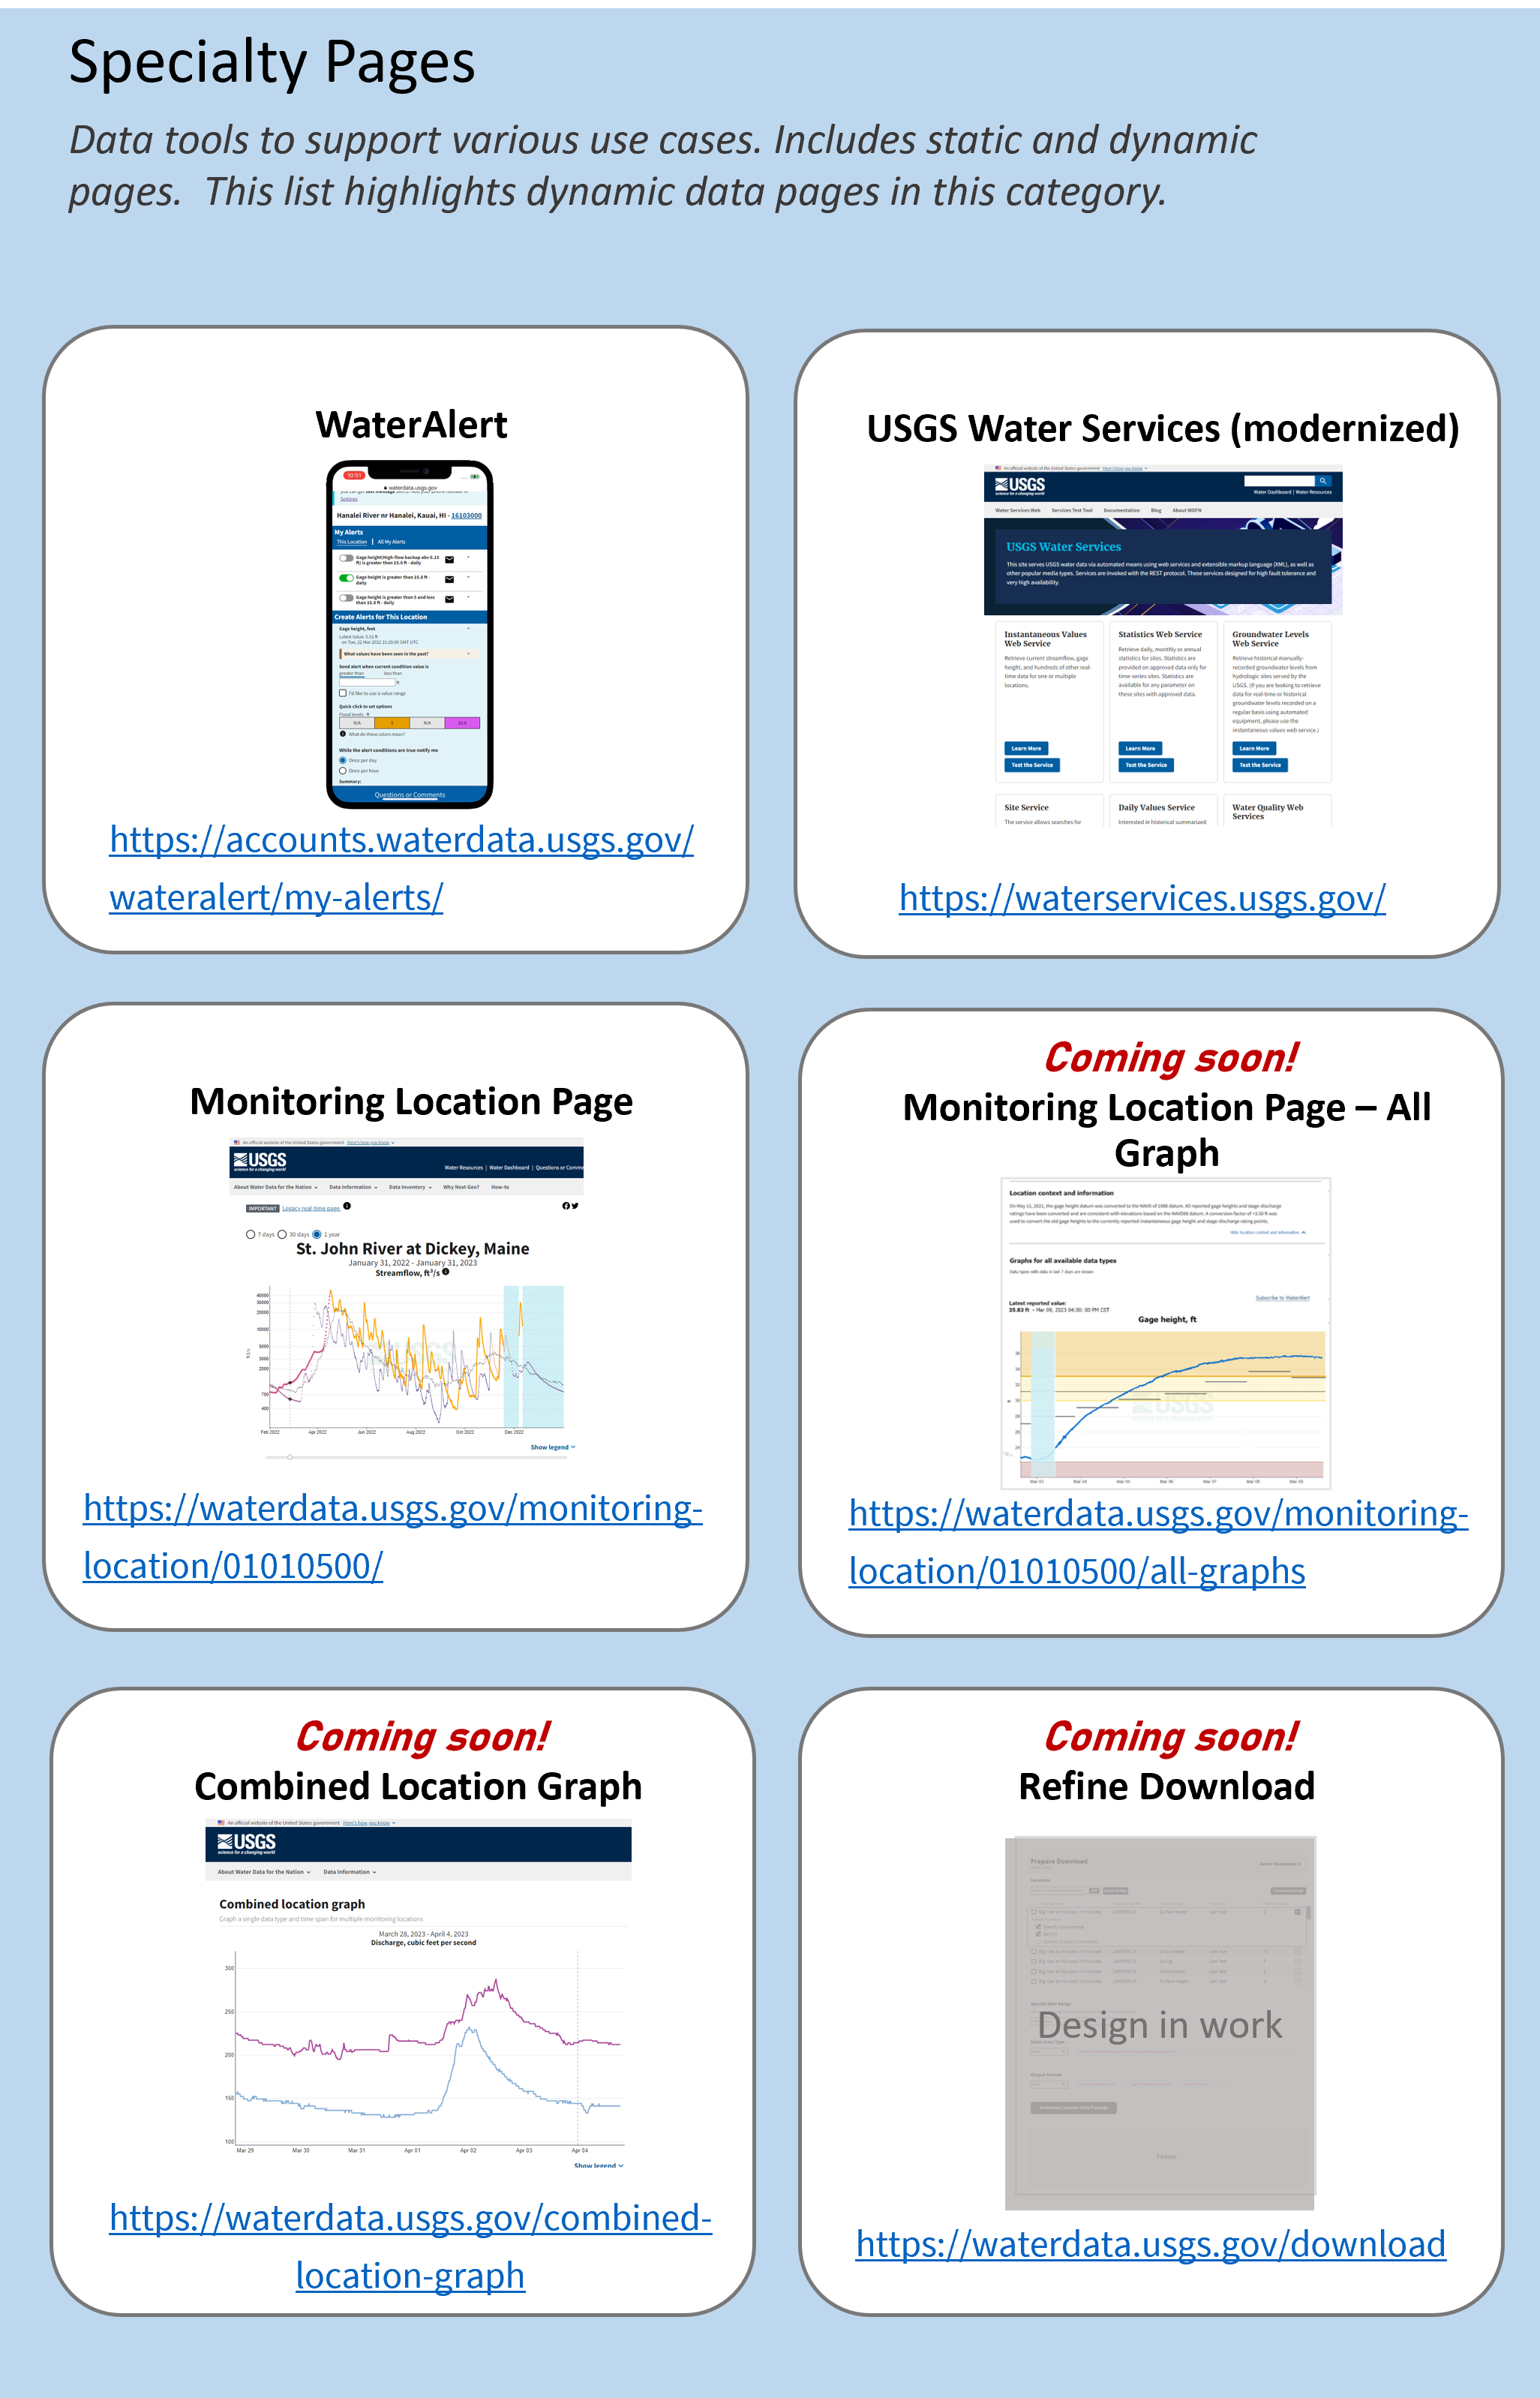 A graphic describing Specialty Pages which includes 6 separate pages: WaterAlert at https://accounts.waterdata.usgs.gov/wateralert/, Monitoring Location Page with an example at https://waterdata.usgs.gov/monitoring-location/01010500, and 4 new pages coming soon to WDFN: USGS Water Services (modernized), Monitoring Location Page – All Graphs, Combined Location Graph, and Refine Download